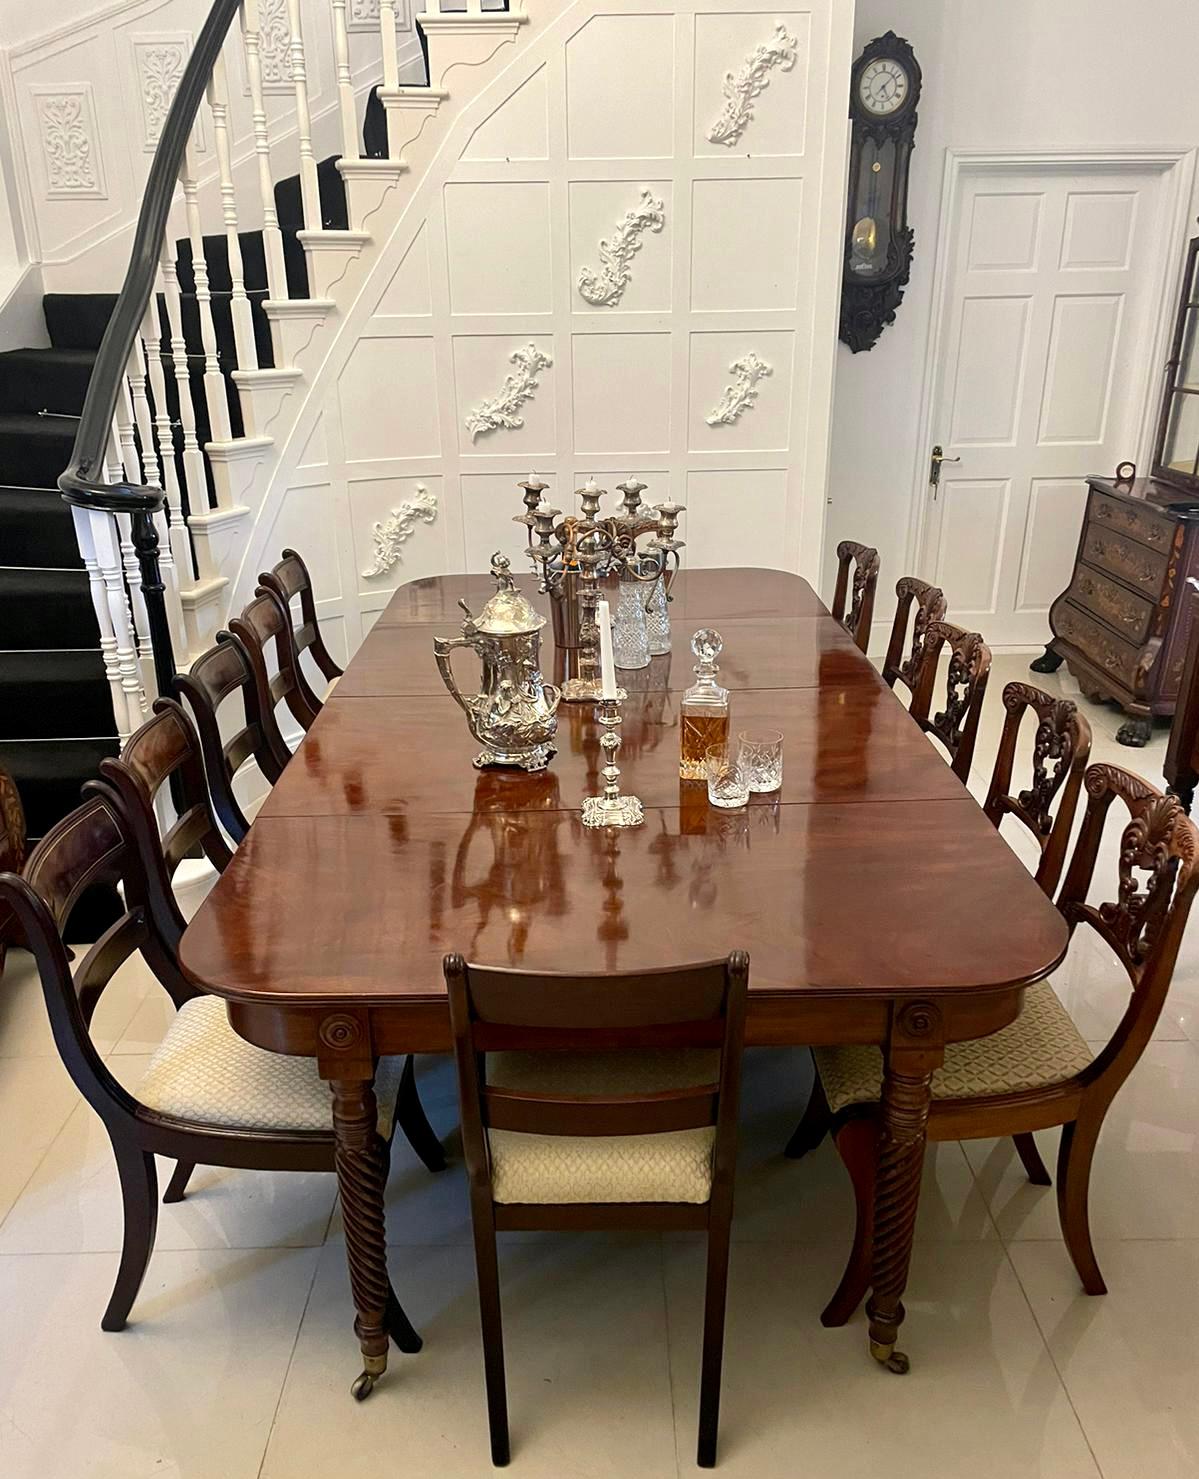 Outstanding quality antique Regency figured mahogany metamorphic extending dining table having an outstanding quality figured mahogany top with two original extra leaves with a reeded edge, unusual extending concertina action mahogany frieze